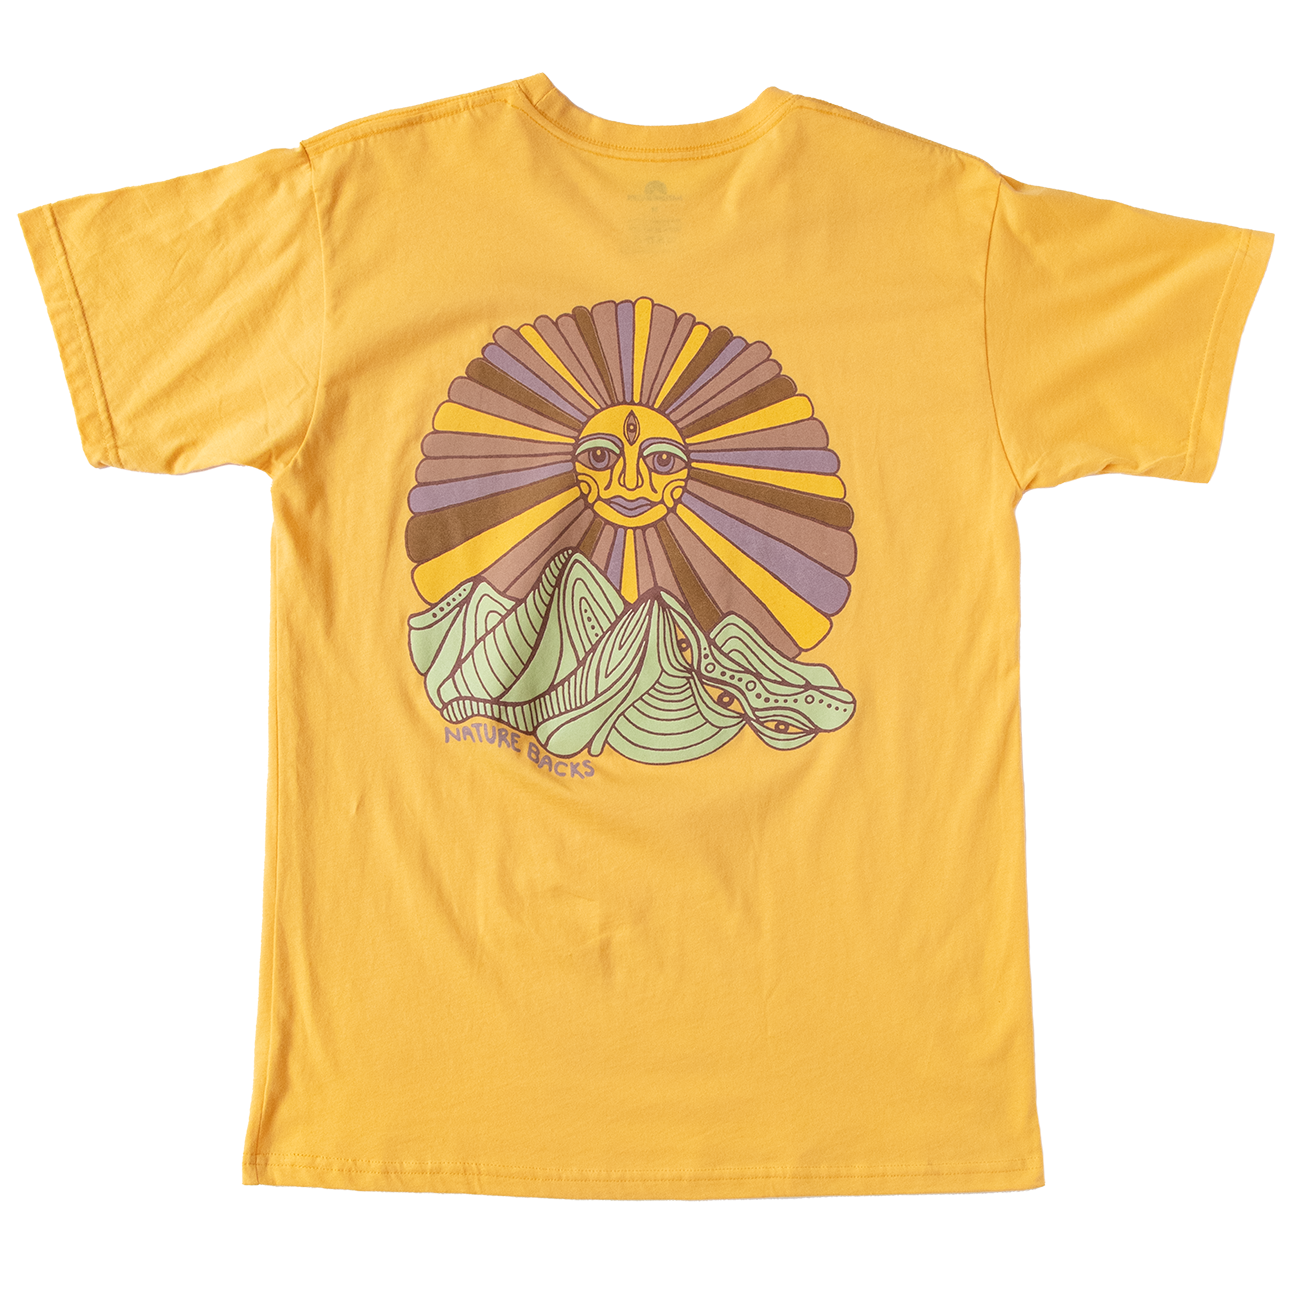 Nature Backs Limited Edition Short Sleeve 100% Organic Cotton T-Shirt | Limited Awaken Citrus Short Sleeve made with Eco-Friendly Fibers Sustainably made in the USA 